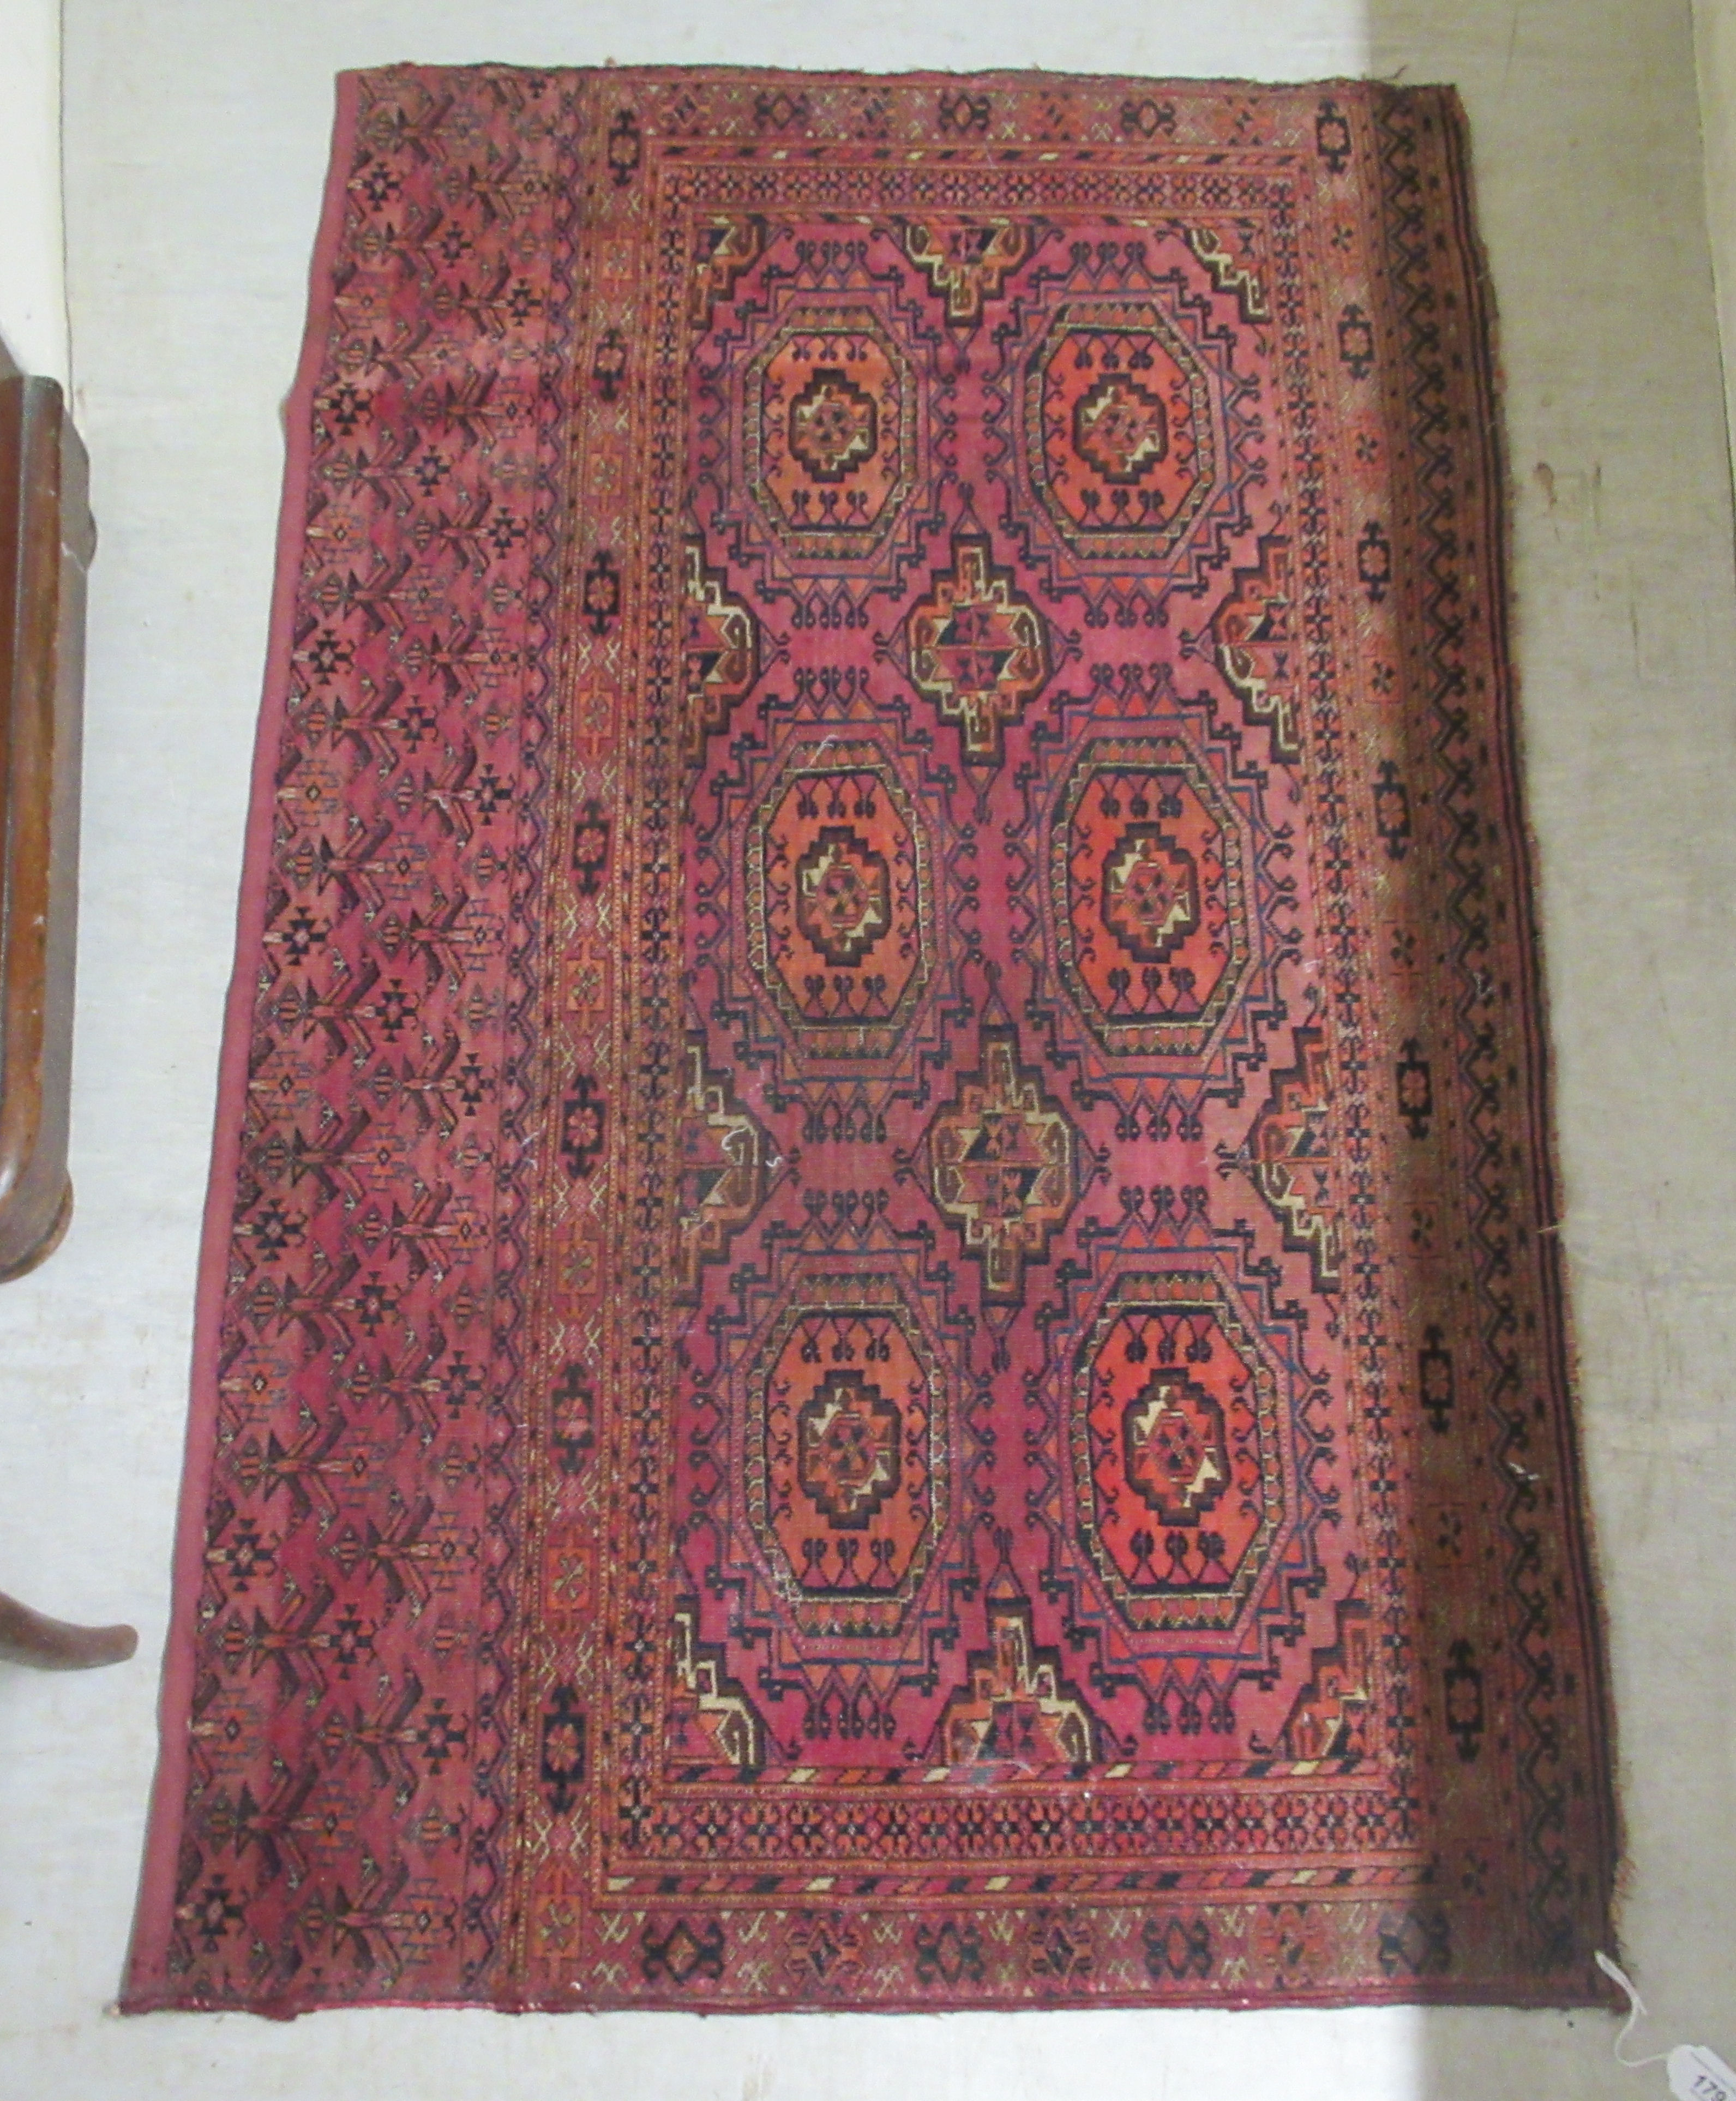 A Bokhara rug, decorated with two columns of four octagonal motifs, on a red ground  29" x 47"